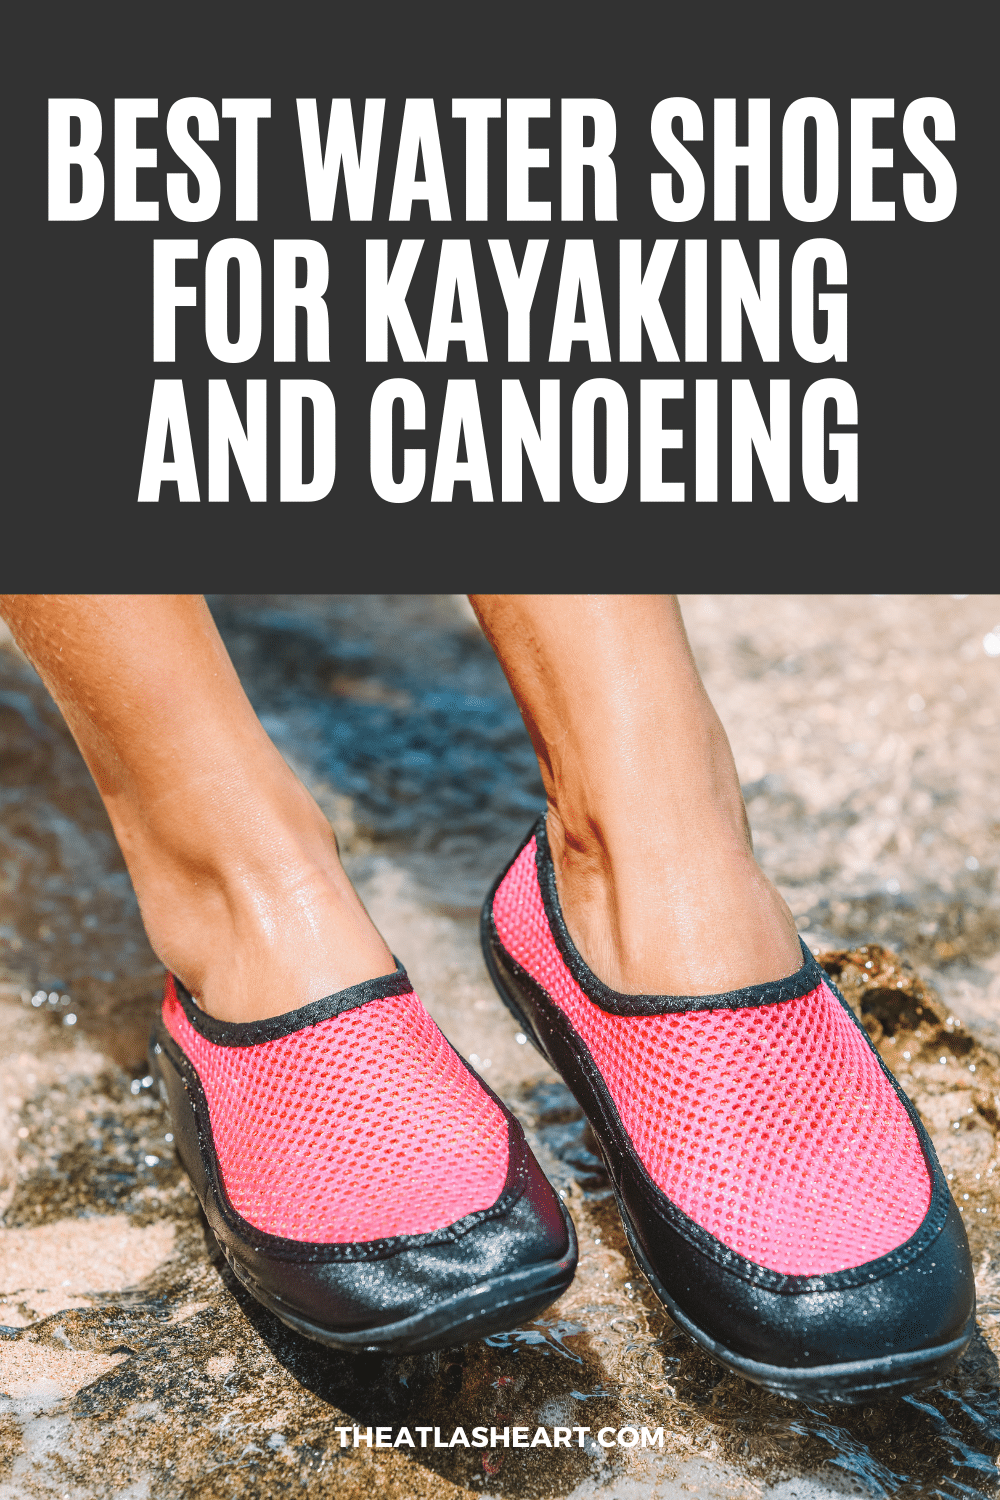 15 Best Water Shoes for Kayaking & Canoeing (Keep Your Feet Protected)